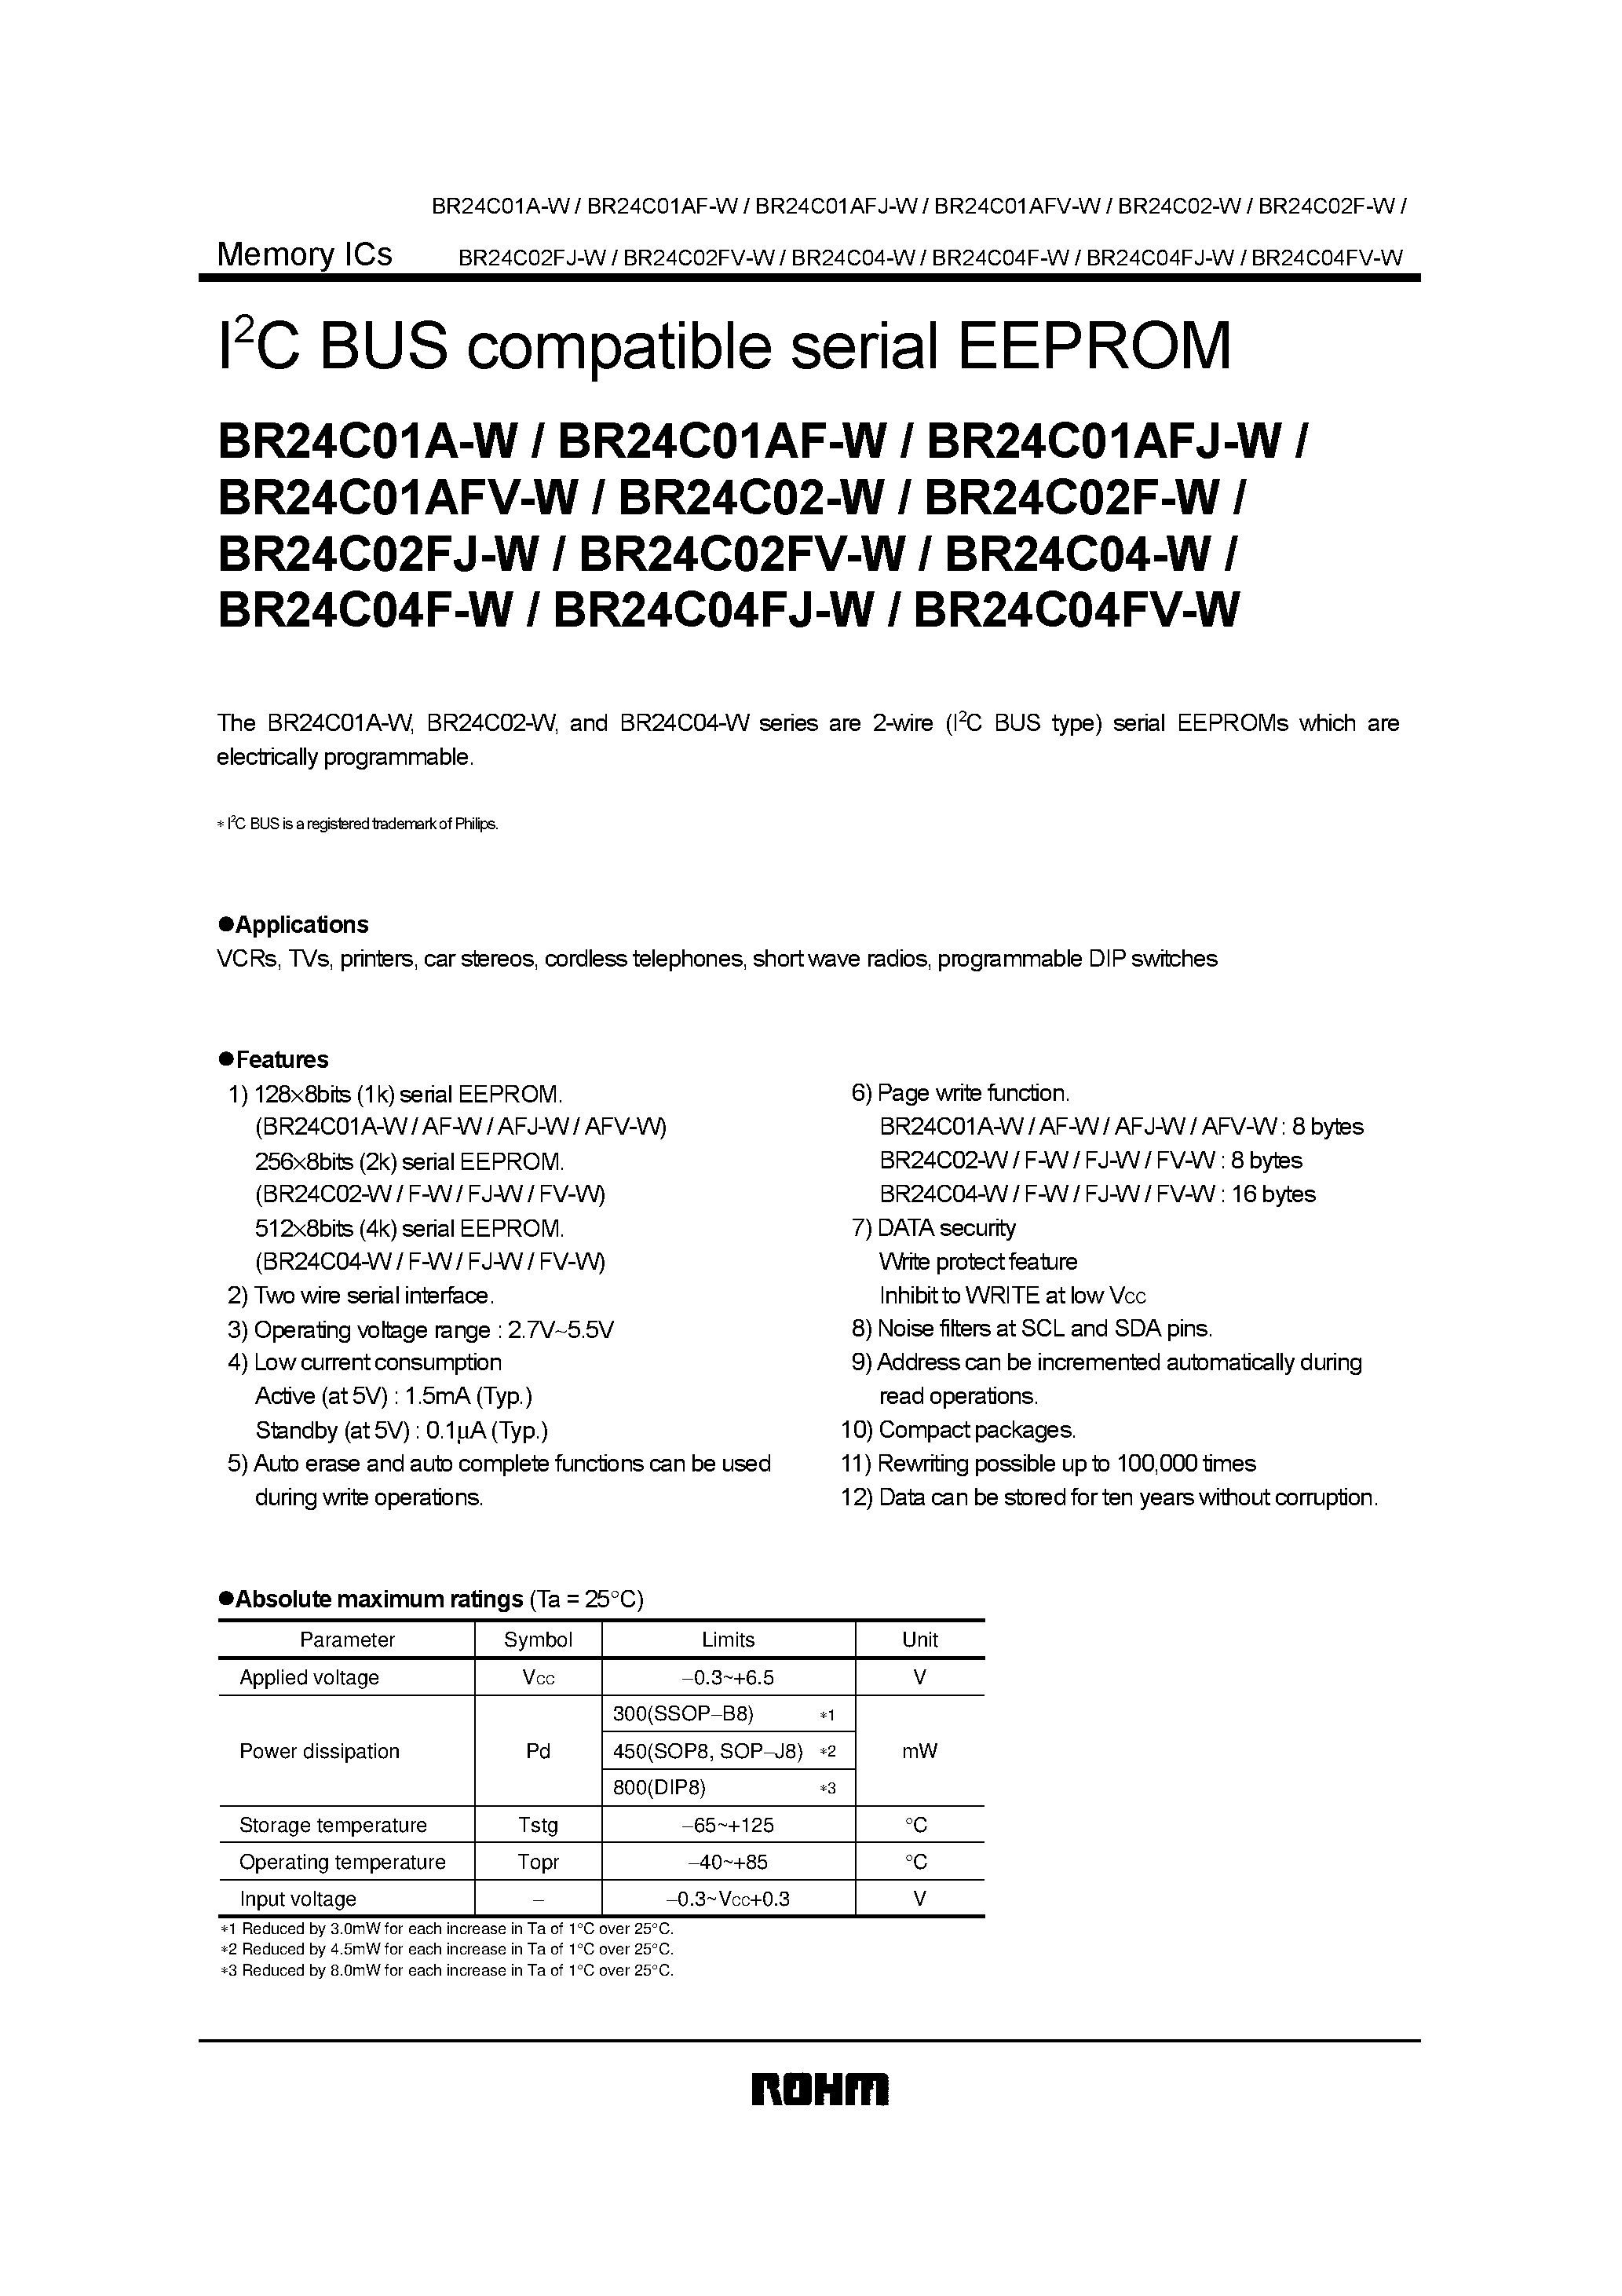 Datasheet BR24C04FV-W - I2C BUS compatible serial EEPROM page 1